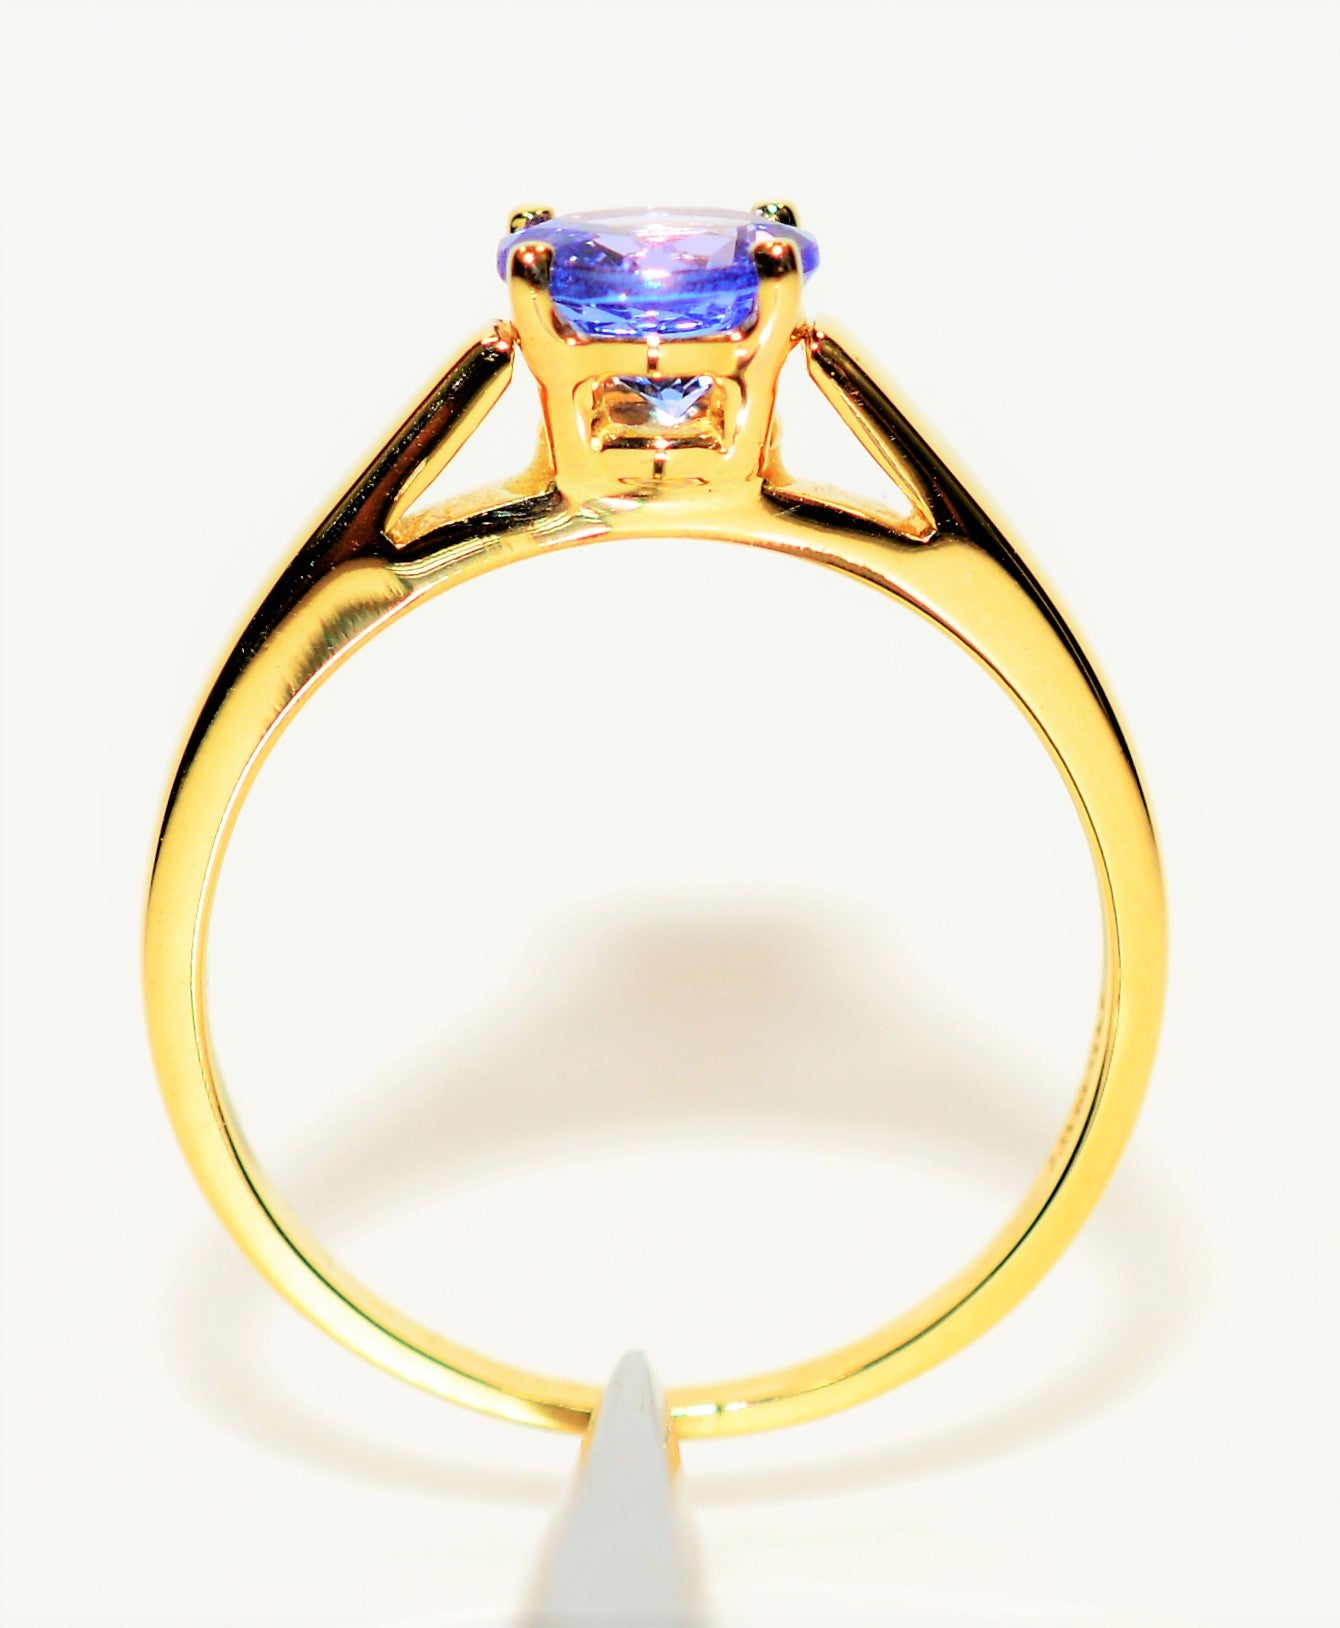 Natural Tanzanite Ring 14K Solid Gold .91ct Solitaire Ring Gemstone Ring Engagement Ring Wedding Ring Bridal Jewelry December Birthstone